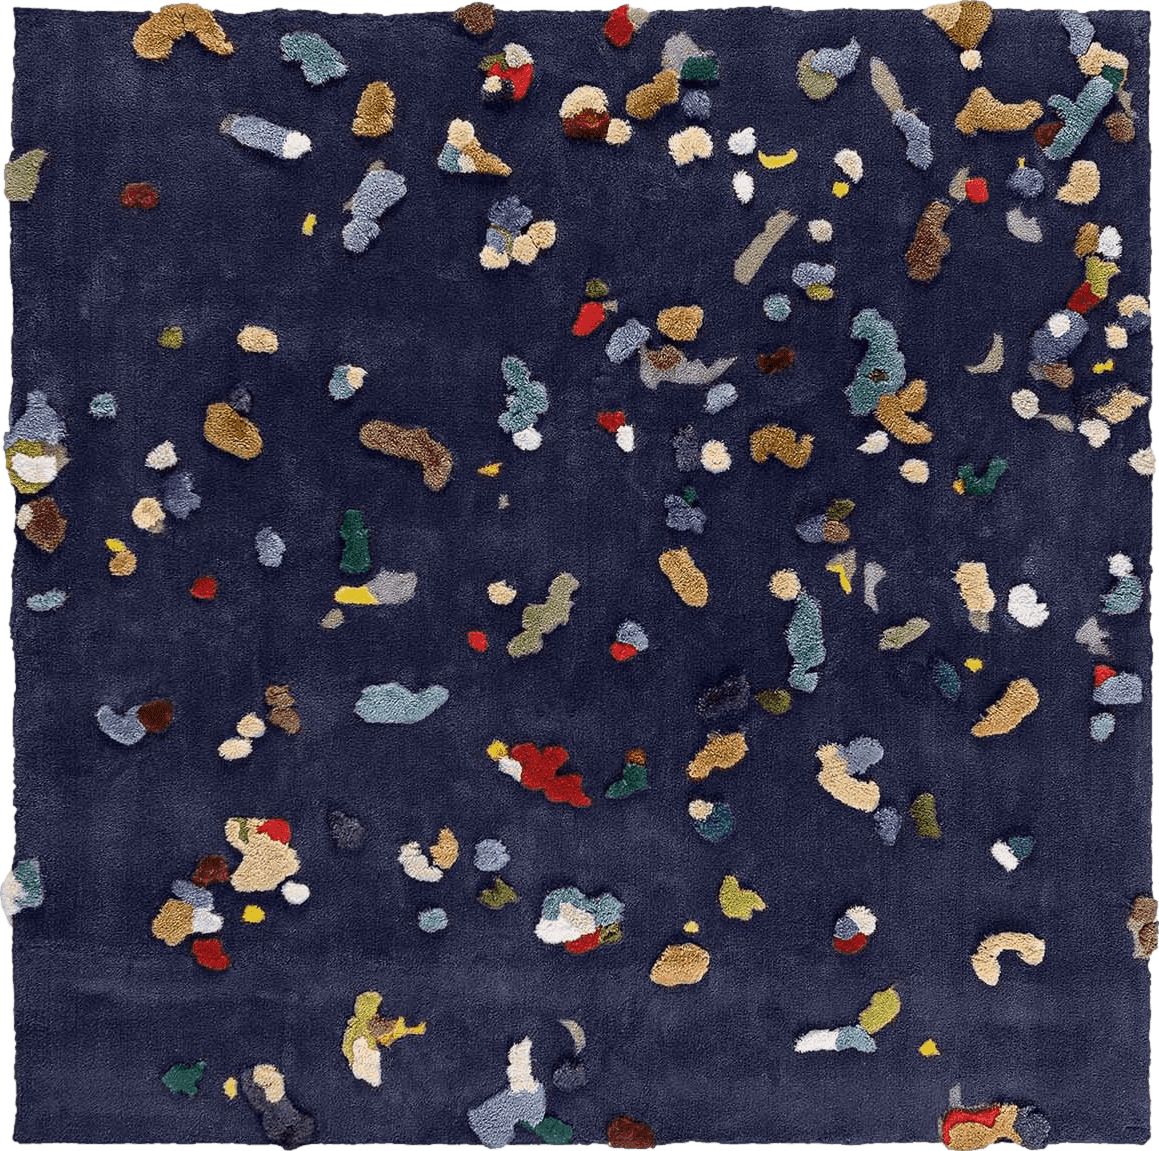 Blue Chaos Rug by Audrone Drungilaite